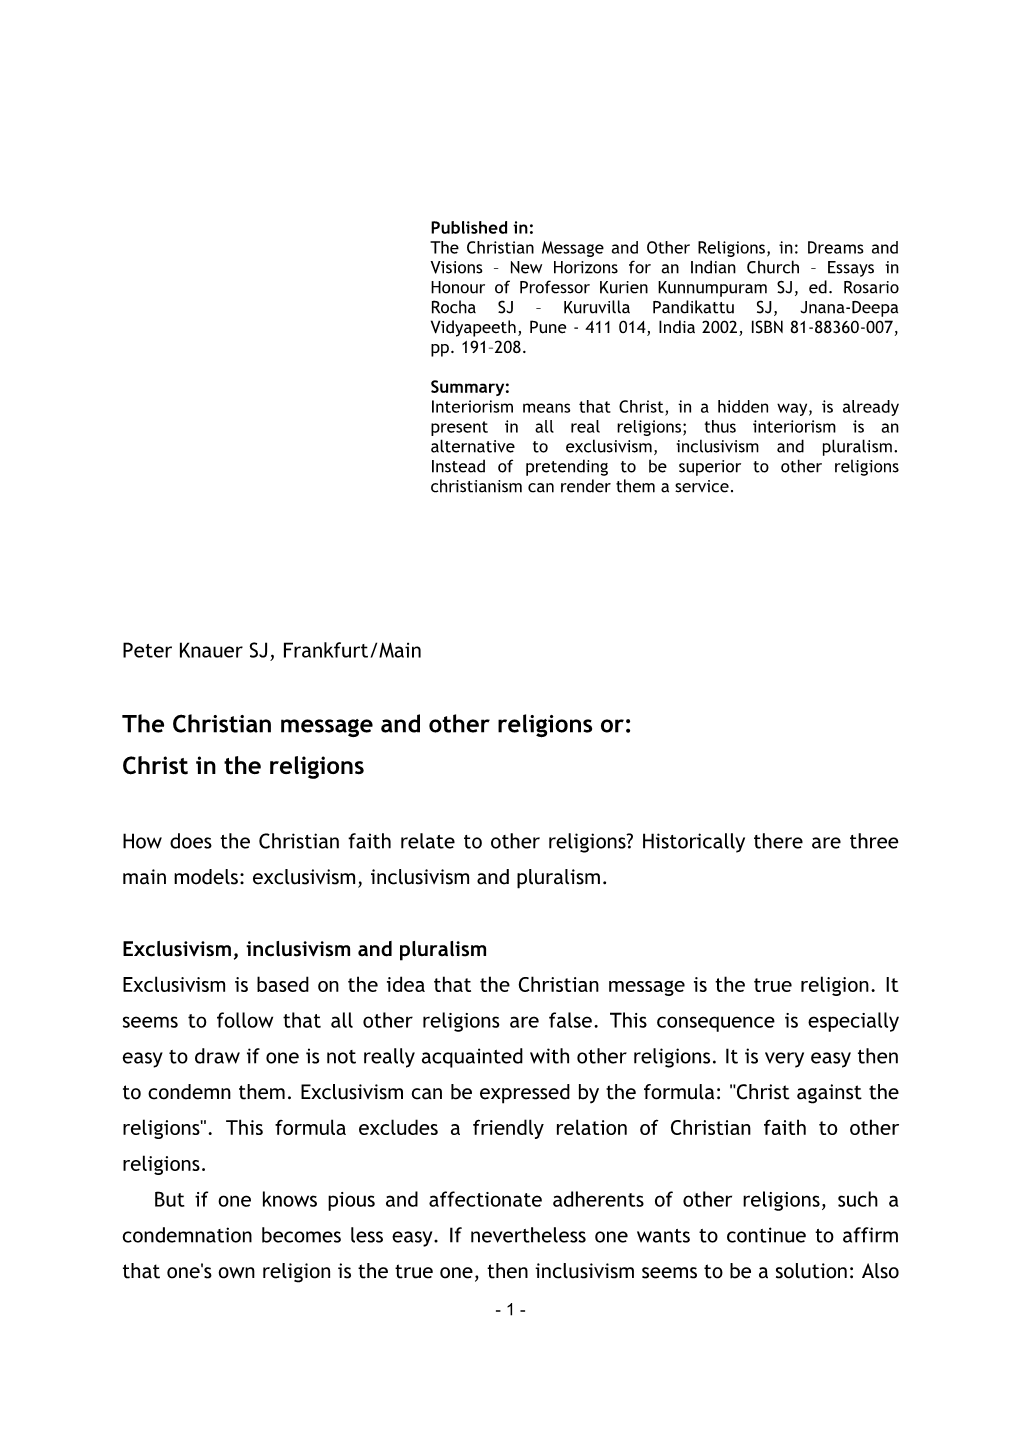 The Christian Message and Other Religions Or: Christ in the Religions